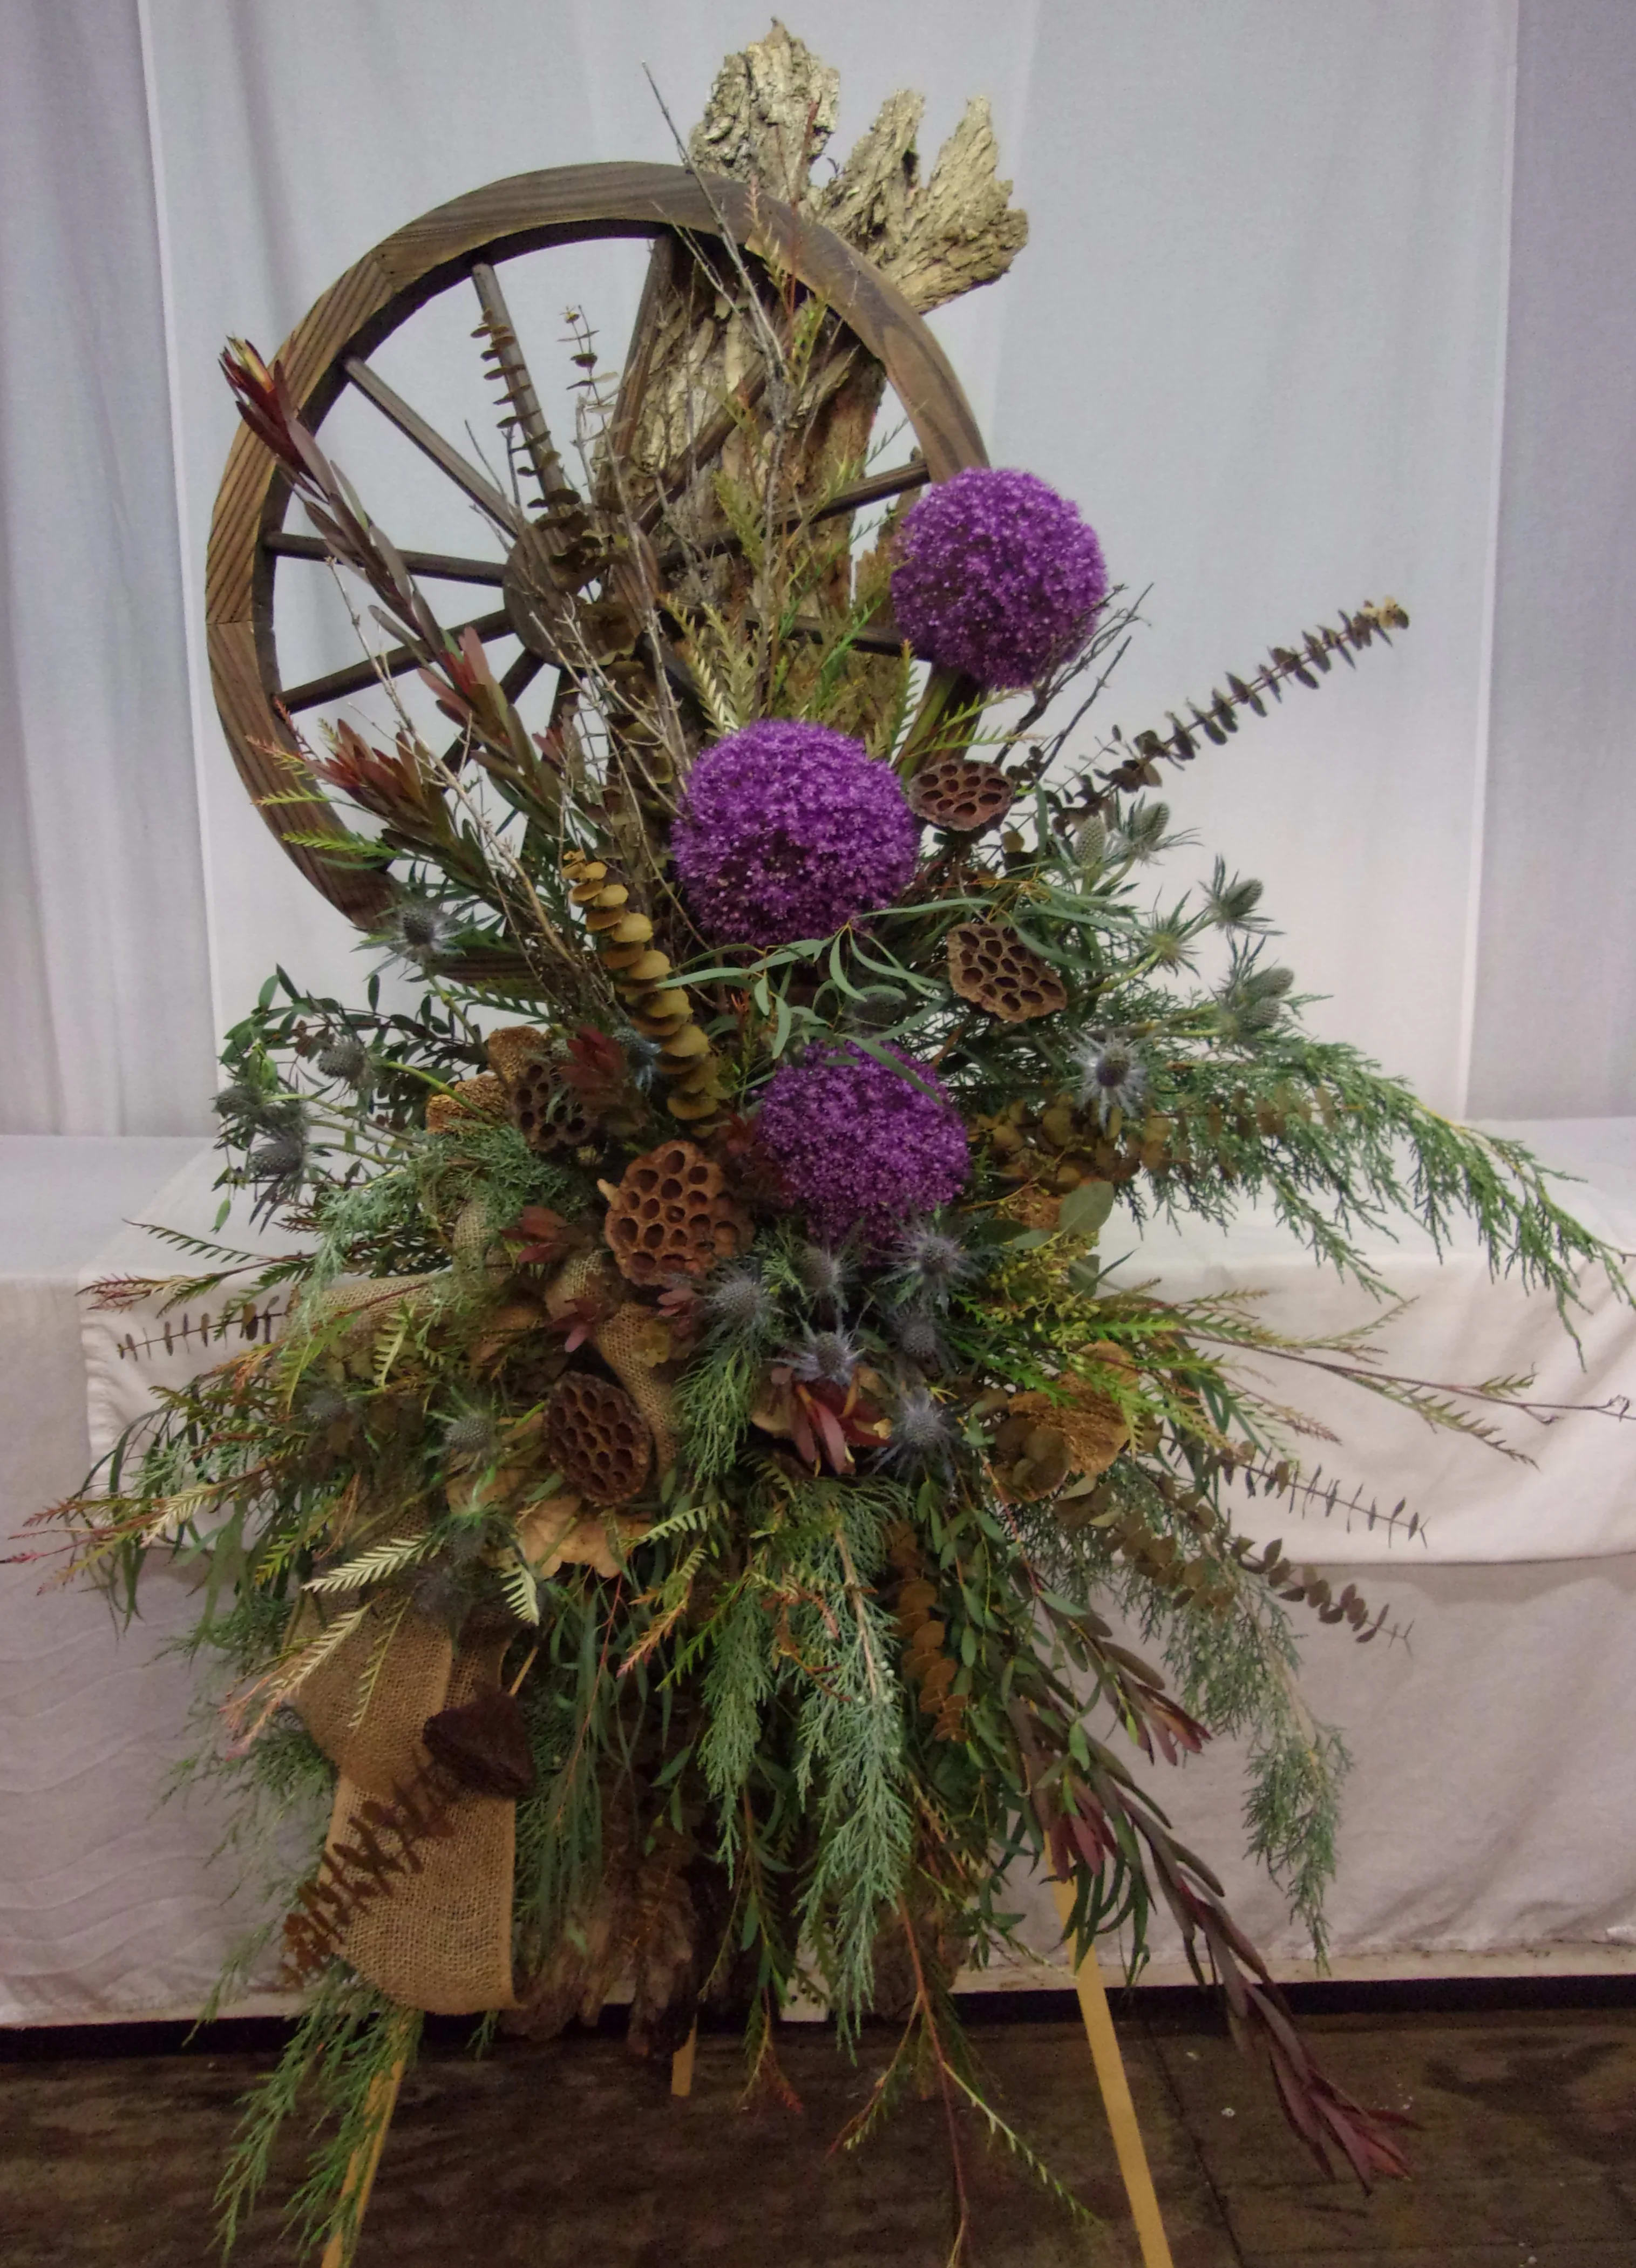 Warmhearted Wagon Wheel - A western tribute that includes a wooden wagon wheel, on rustic type wood, and has a taste of the outdoors with the floral contributions that include juniper/cedar, allium, eucalyptus, and an assortment of dried pods and flowers.